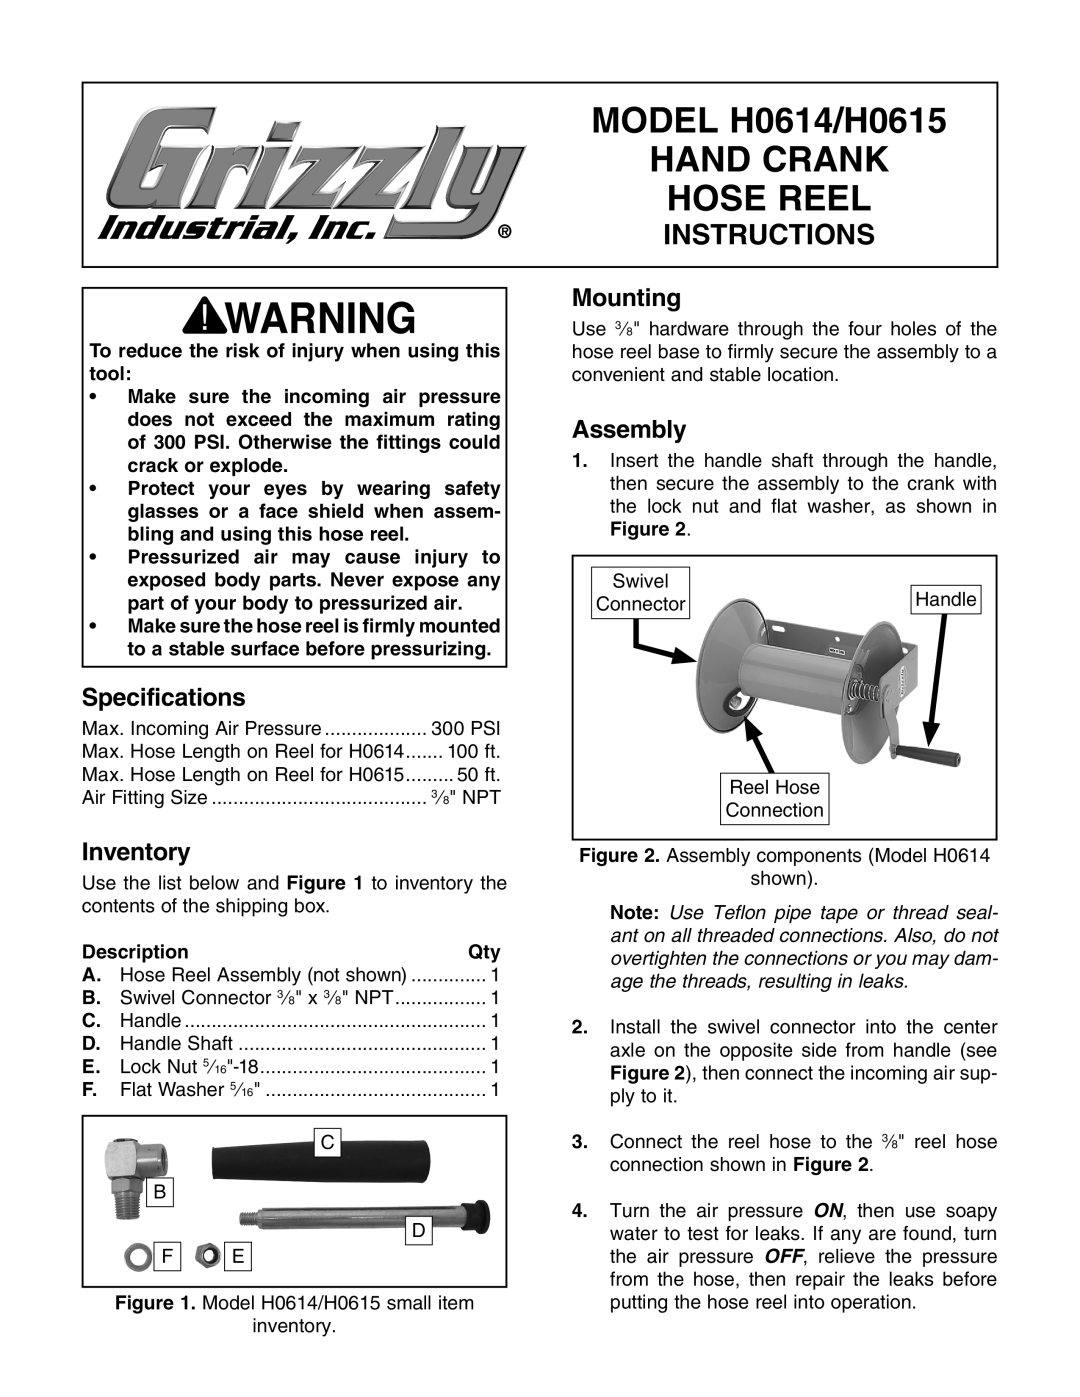 Grizzly H0614 specifications Note Use Teflon pipe tape or thread seal, ant on all threaded connections. Also, do not 